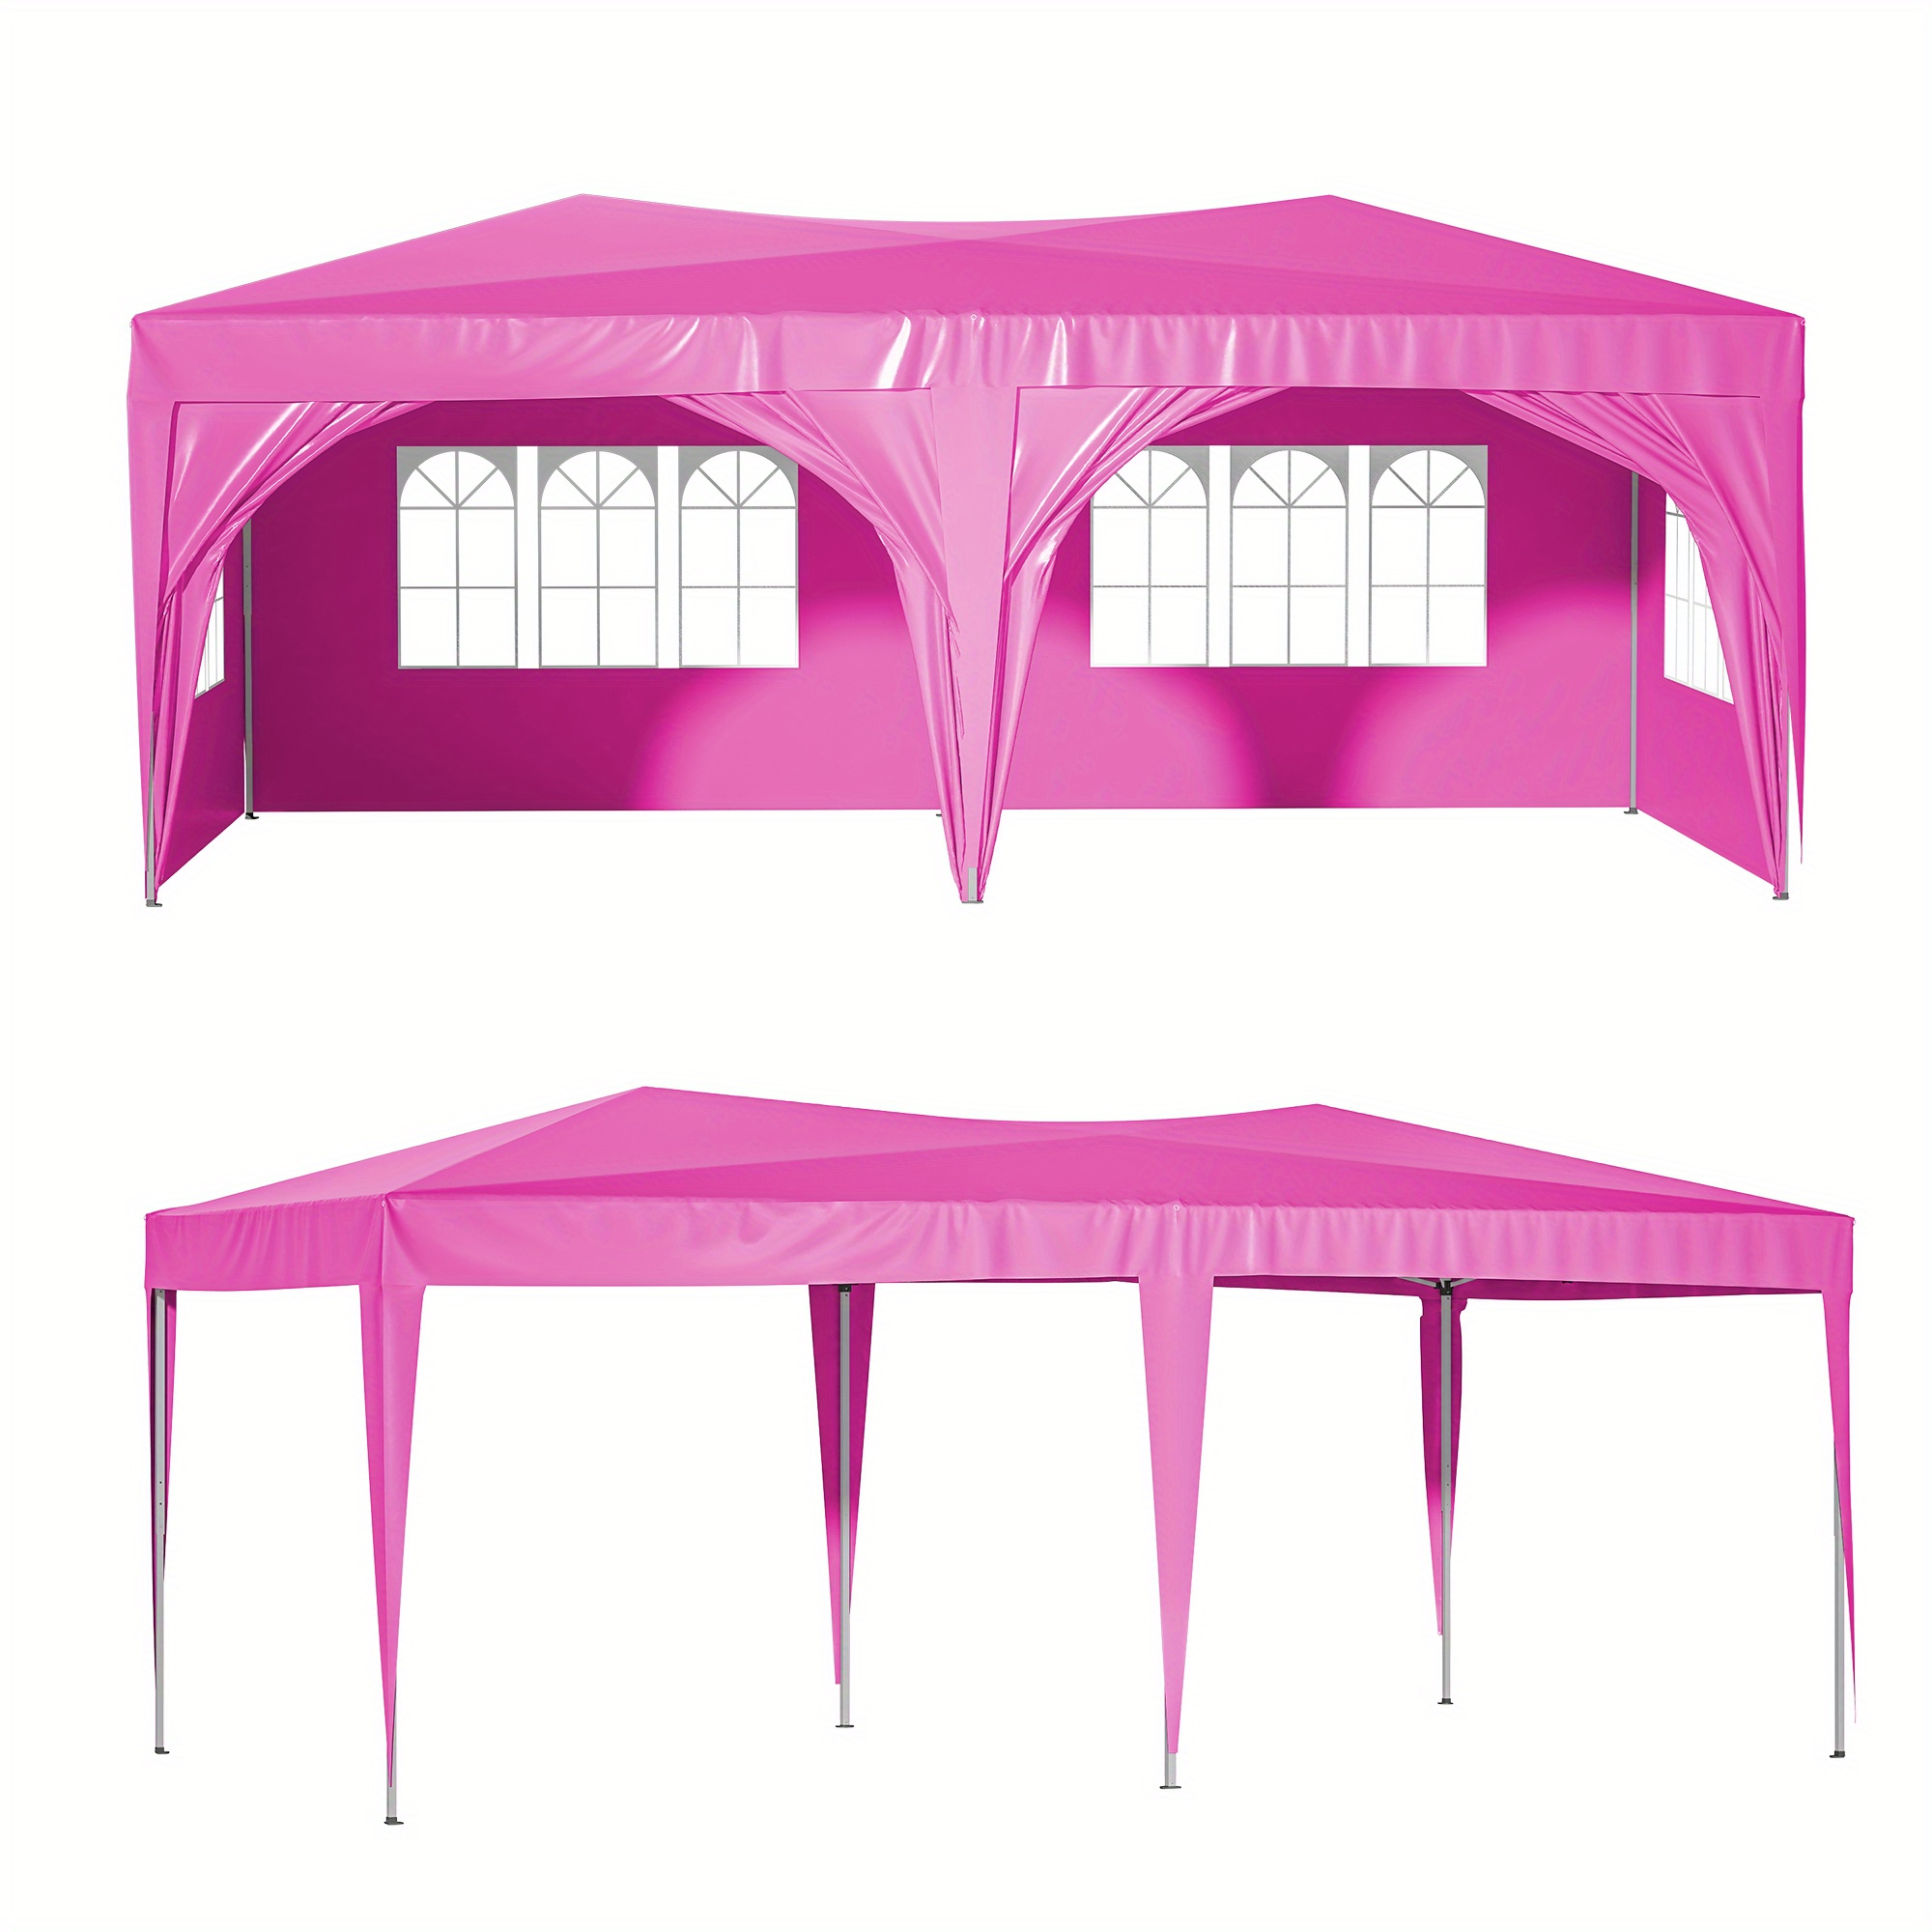 

10'x20' Pop Up Canopy Tent With 6 Sidewalls, Ez Pop Up Outdoor Canopy For Parties, Waterproof Commercial Tent With 3 Adjustable Heights, Carry Bag, 6 Sand Bags, 6 Ropes And 12 Stakes, Pink